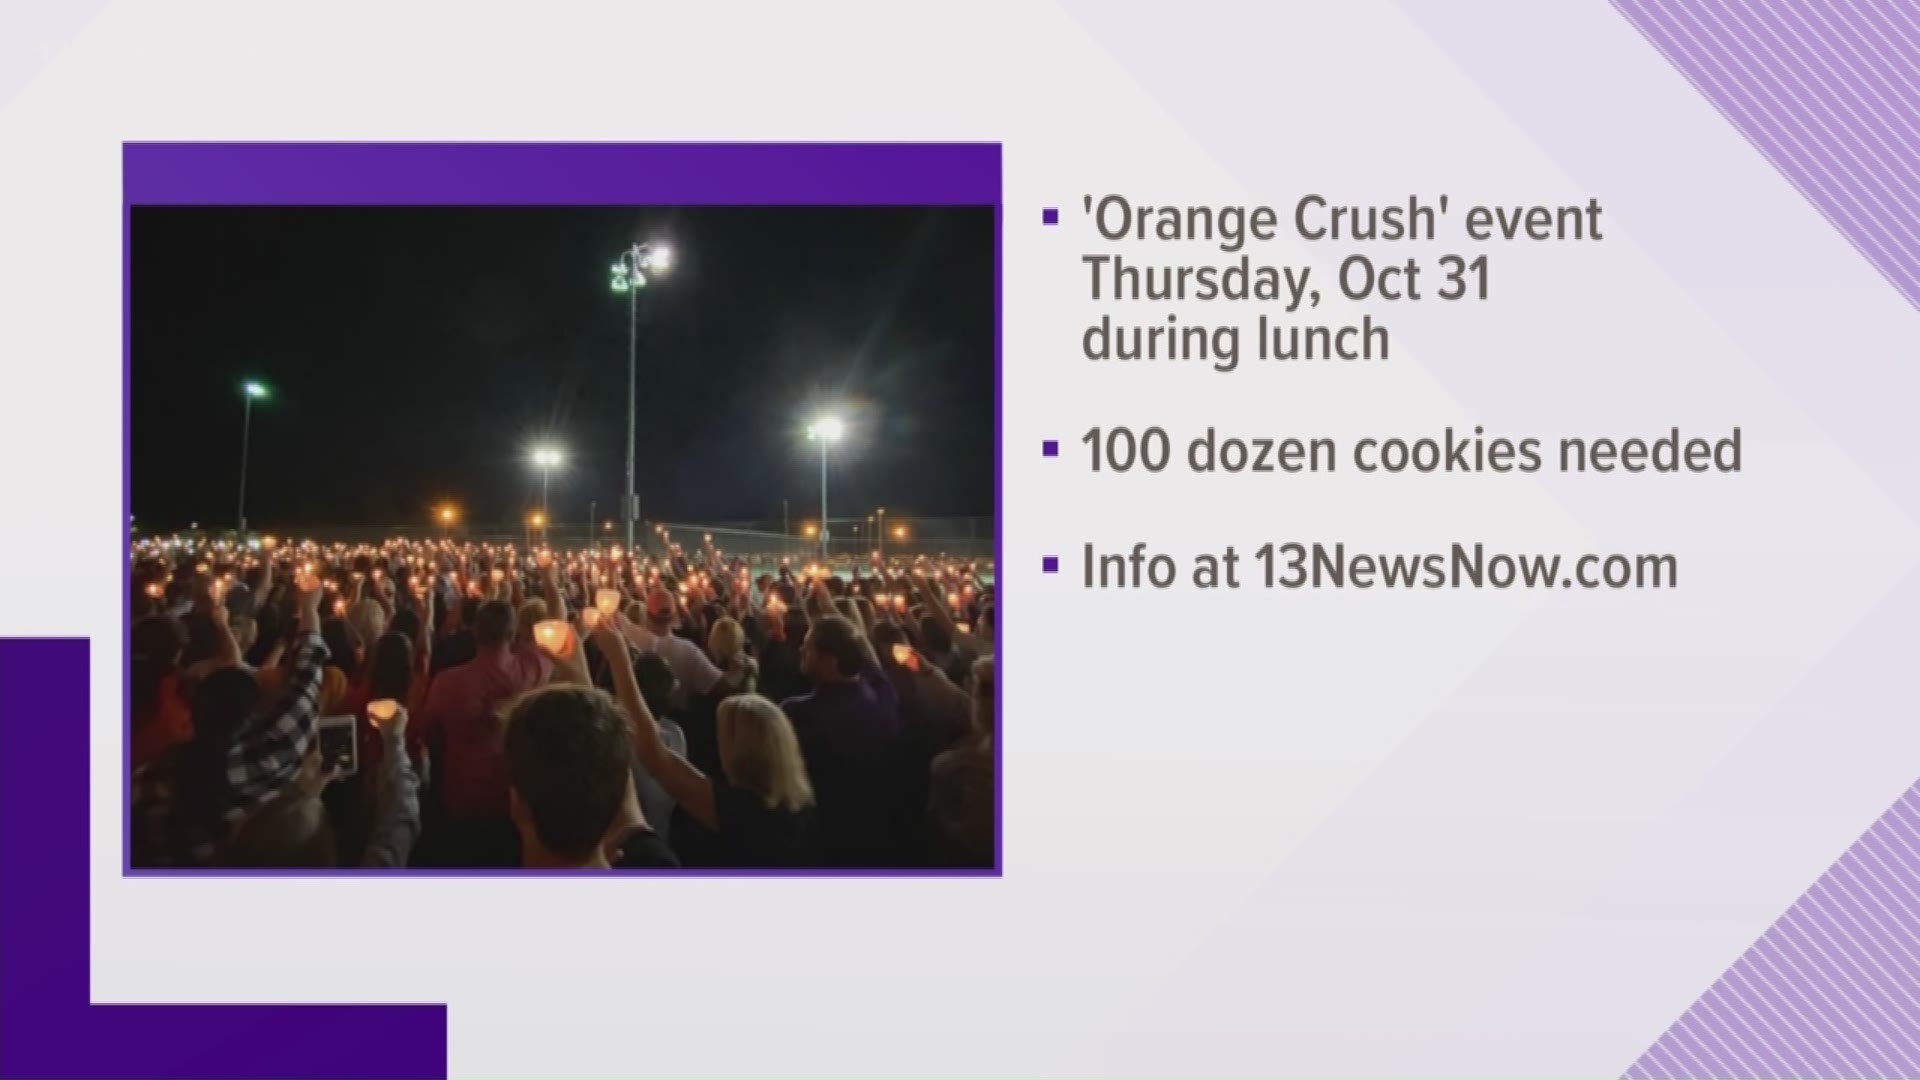 Support is coming from all over for the Tabb High School community after three students died in a car crash.